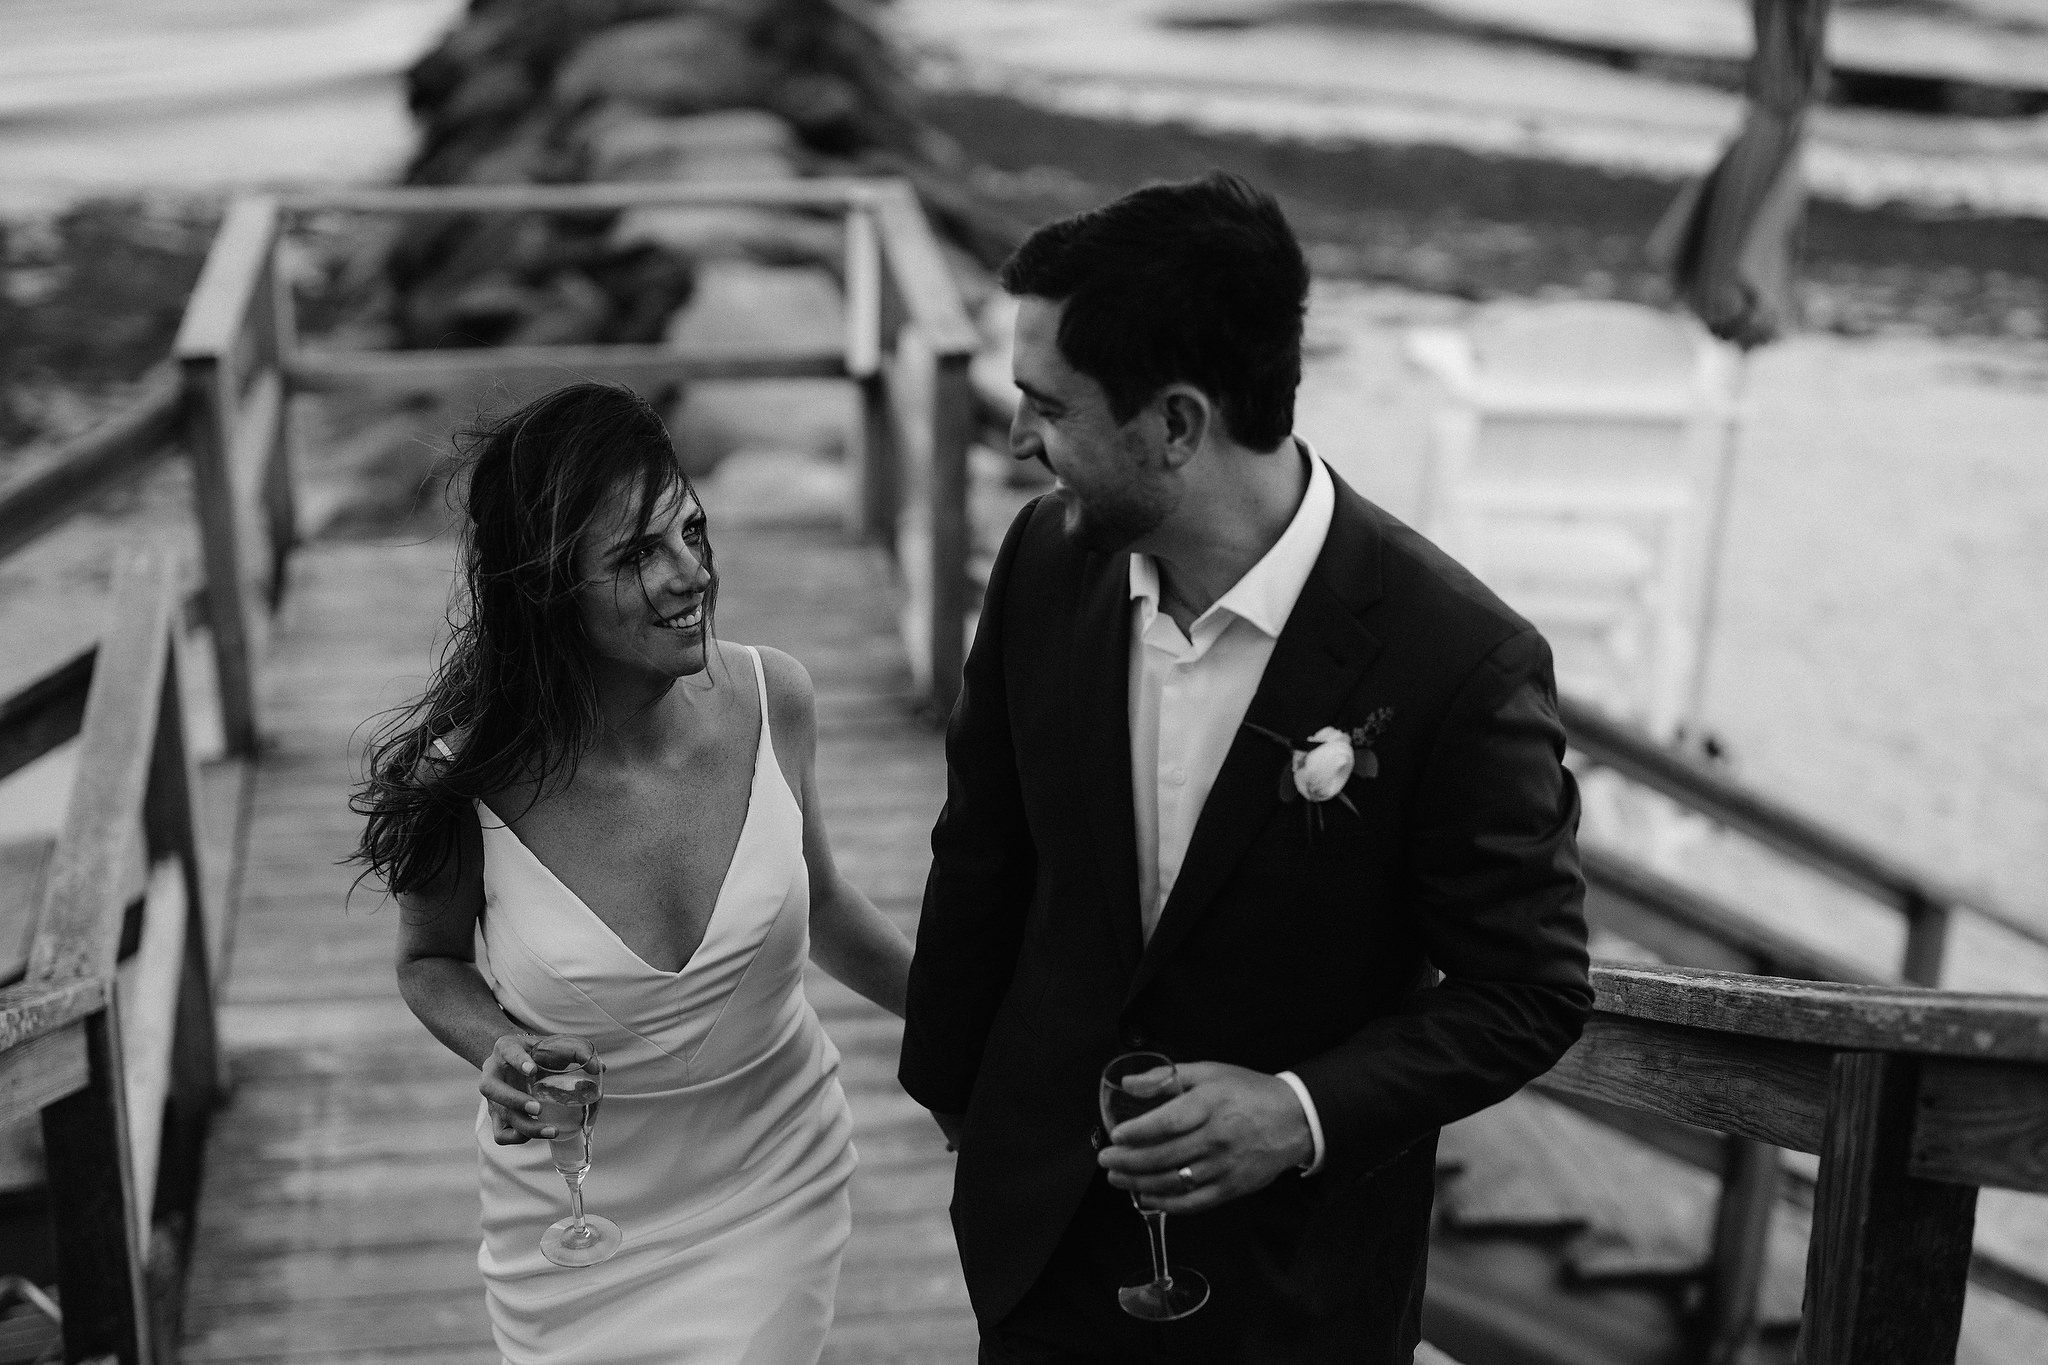 The bride and groom are happily walking on the dock in the seashore. Wianno Club, Cape Cod, Osterville, MA. Beach wedding venue image by Jenny Fu Studio